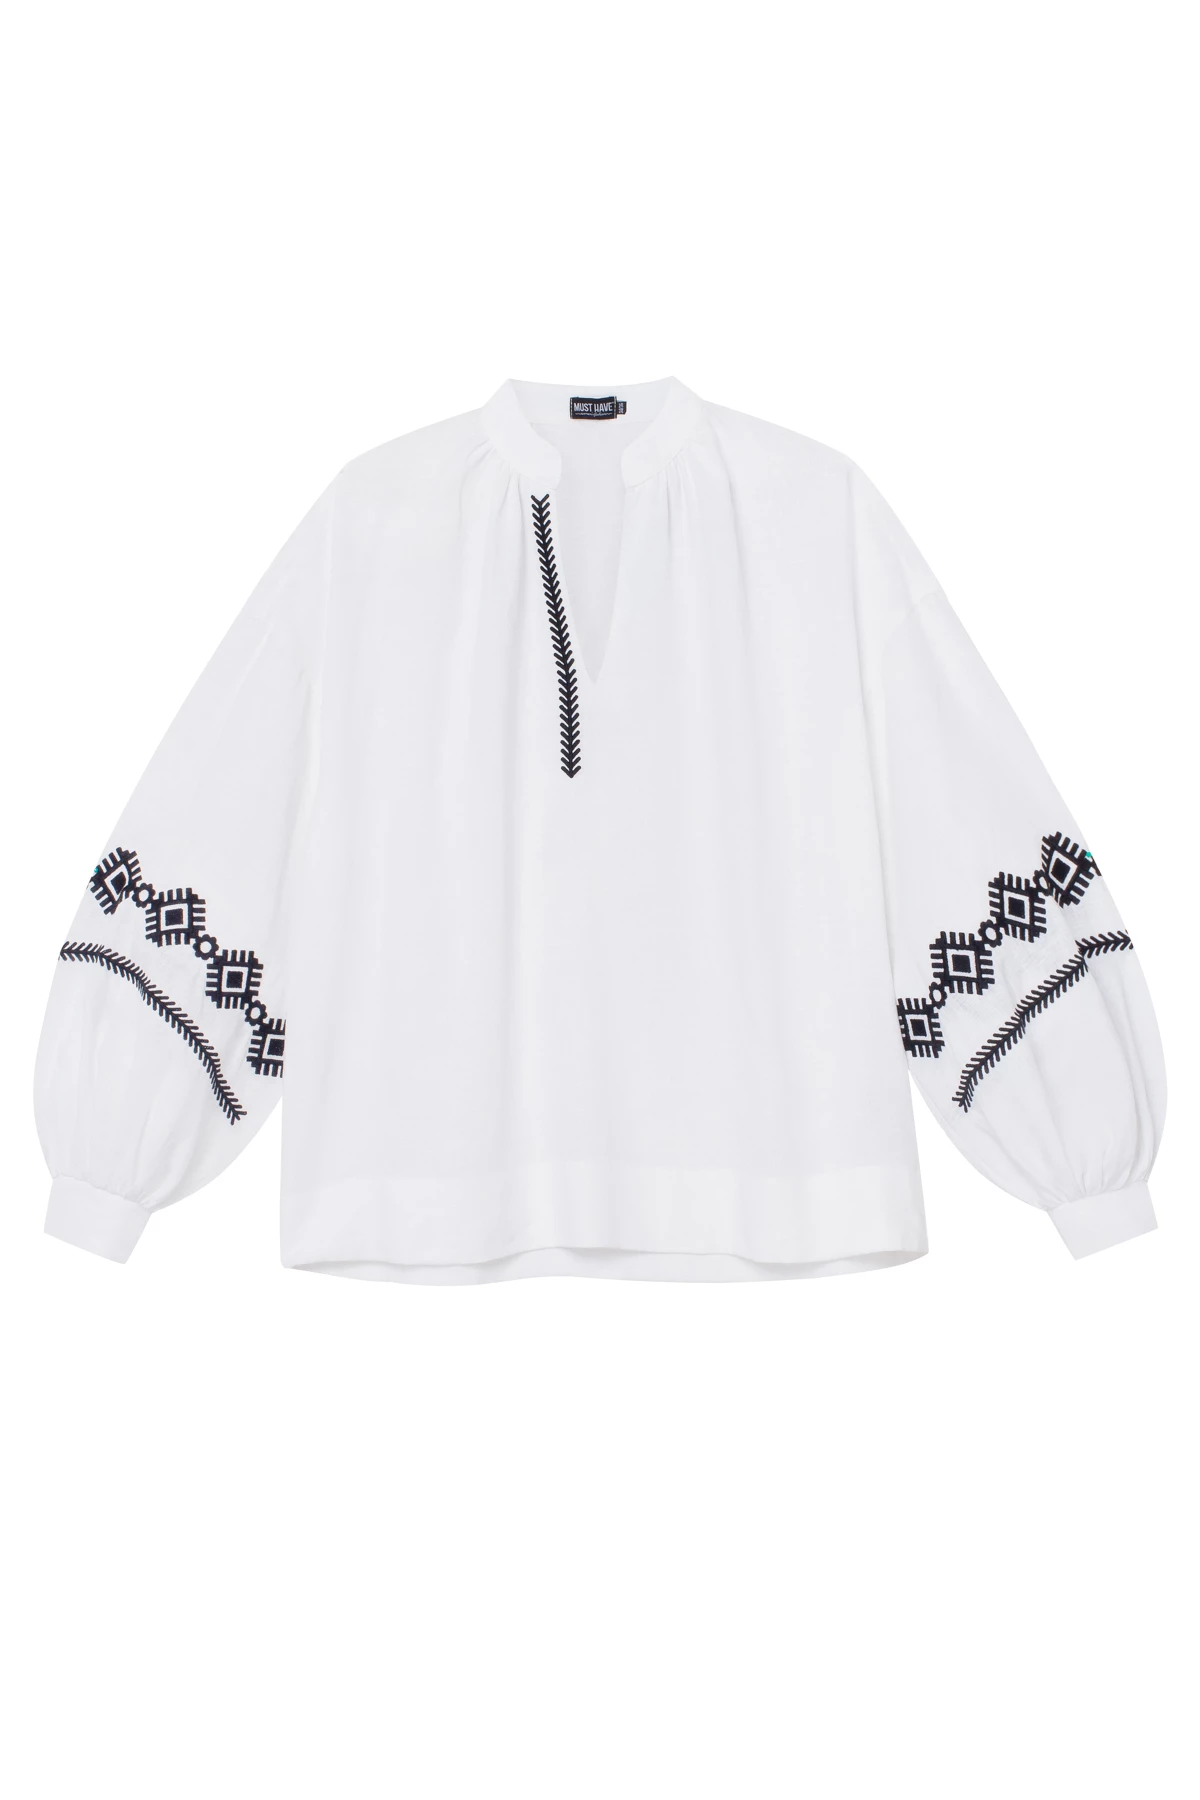 White linen vyshyvanka shirt with floral embroidery, photo 7